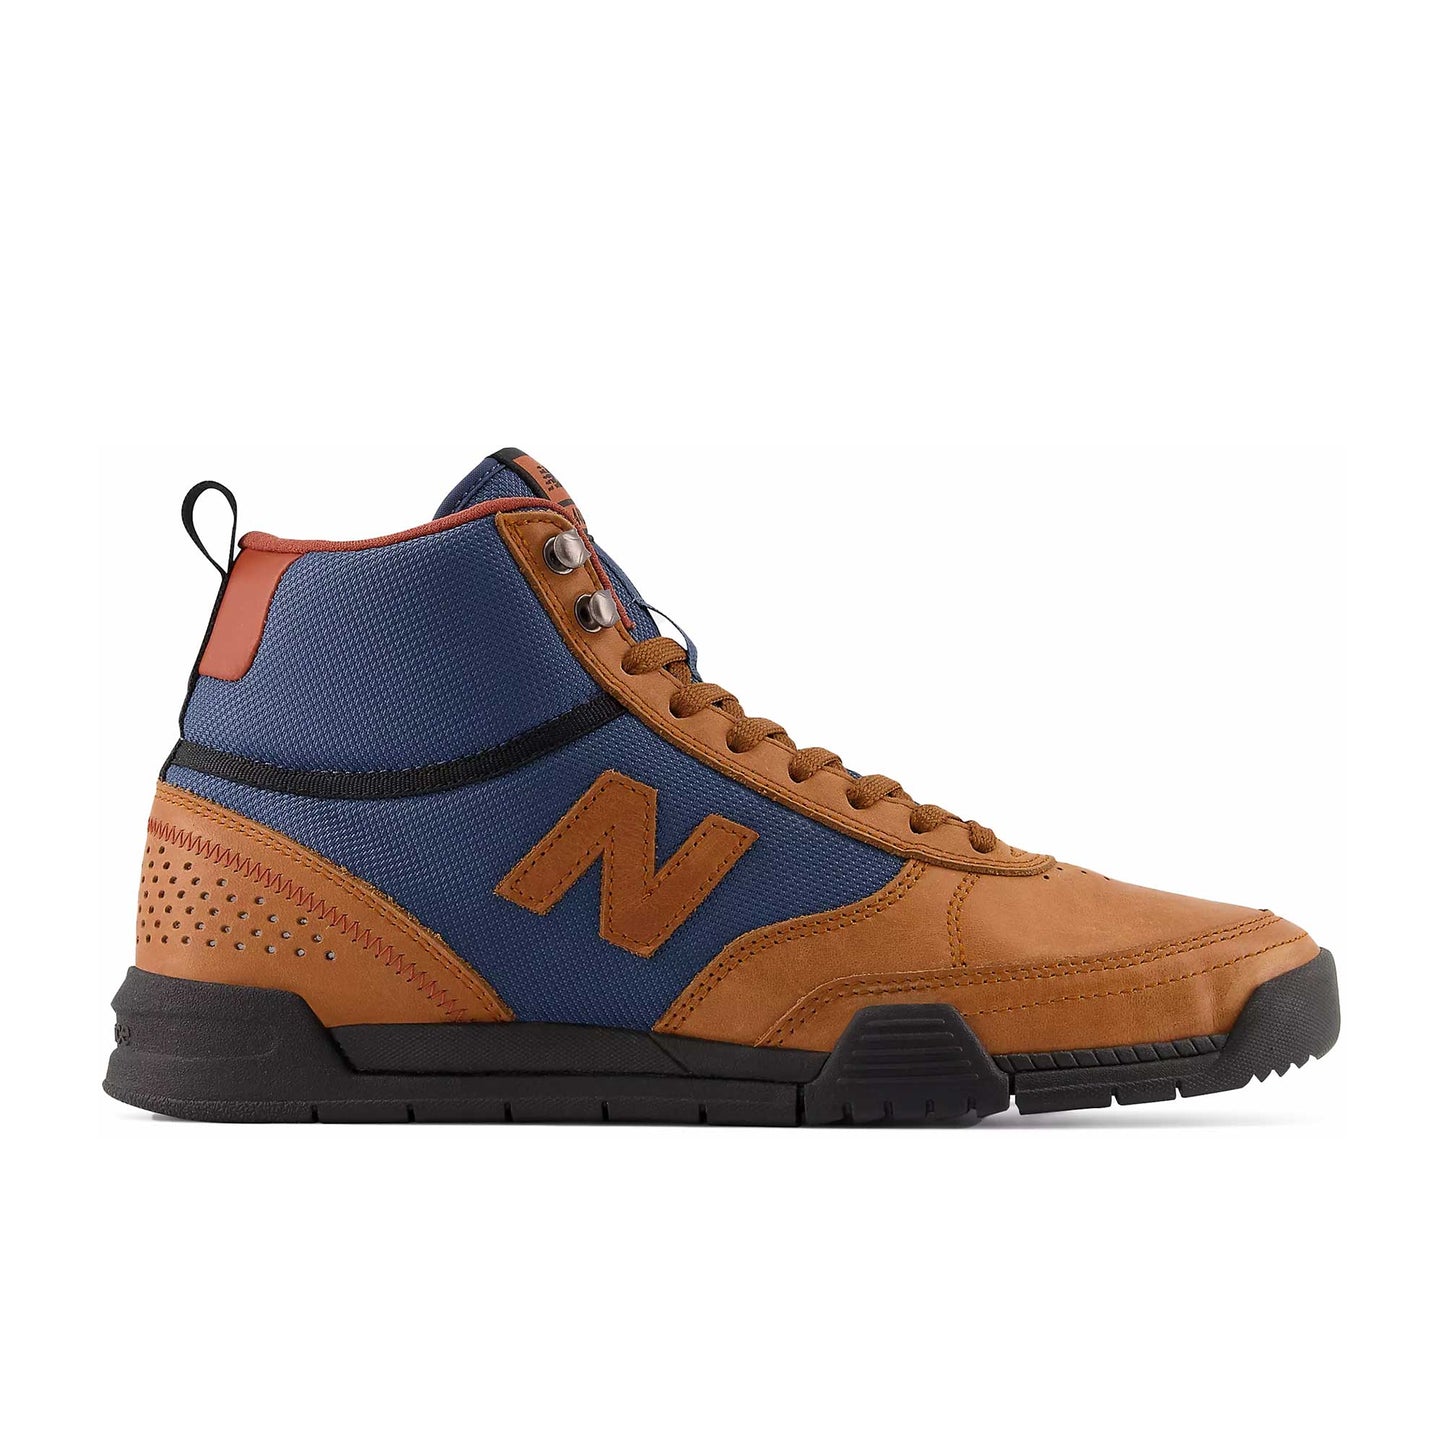 New Balance Numeric 440 Trail, brown with navy - Tiki Room Skateboards - 1